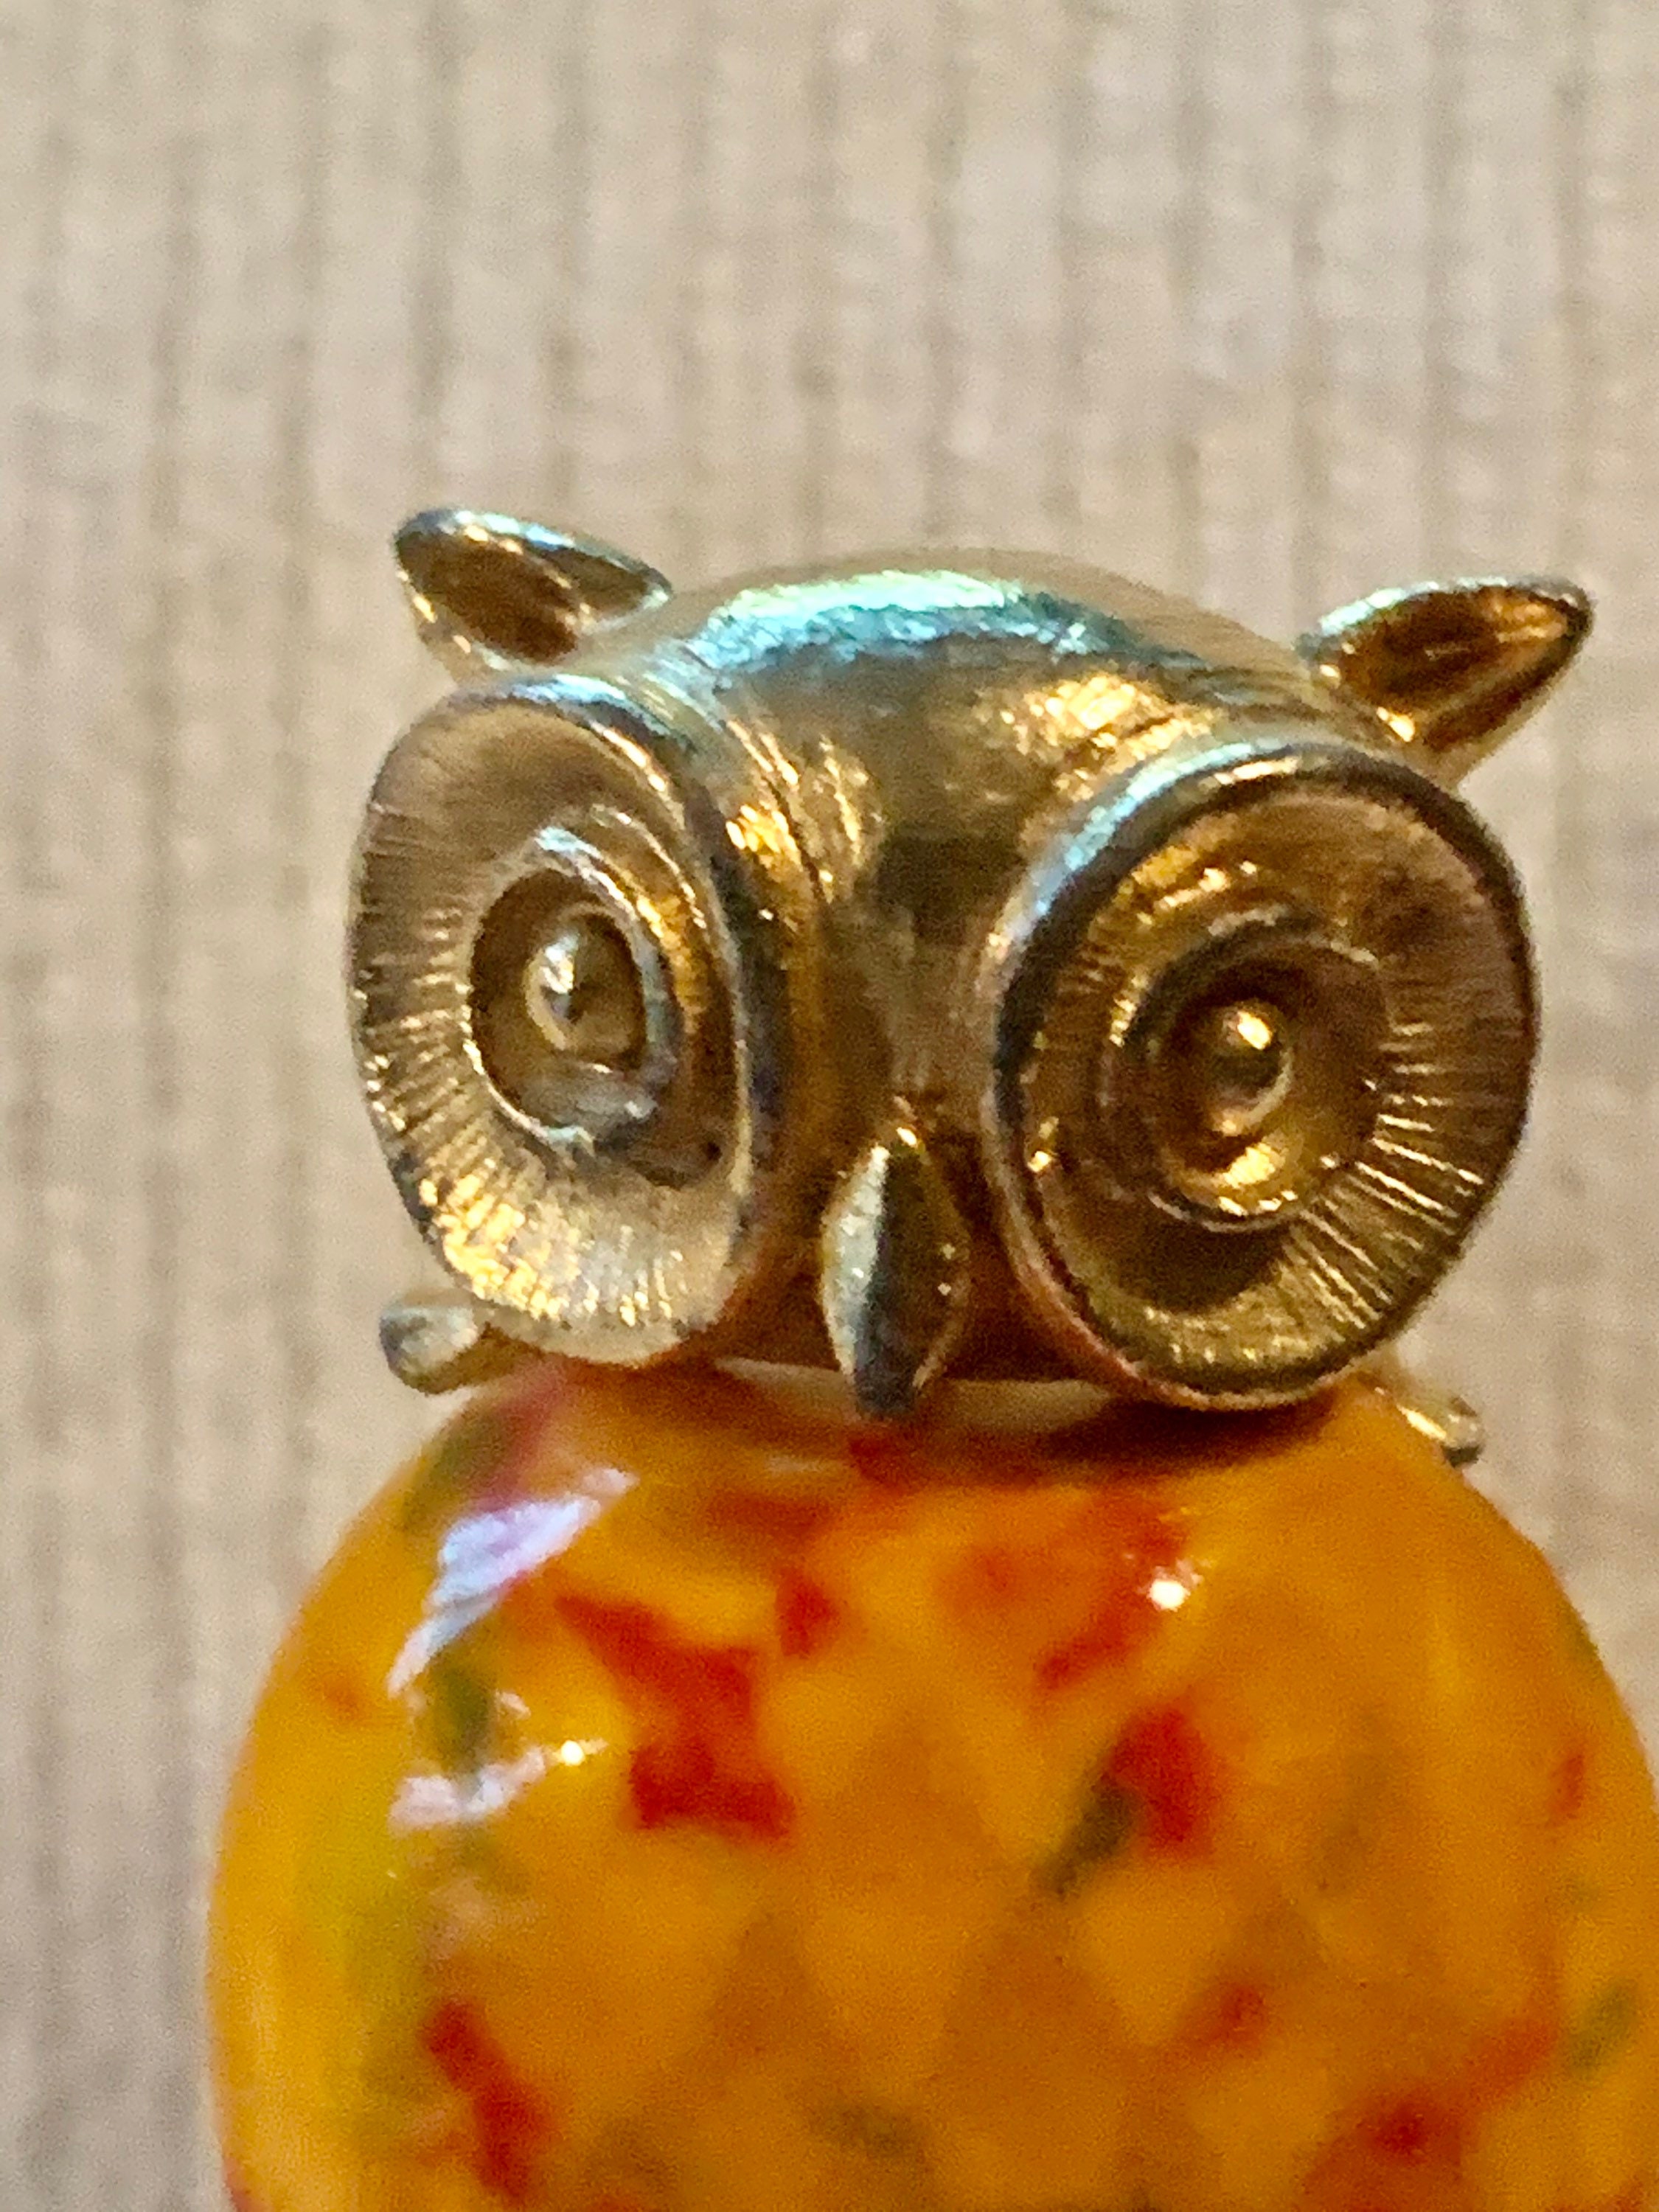 Orange Marbled Jelly Belly Owl brooch pin Etsy